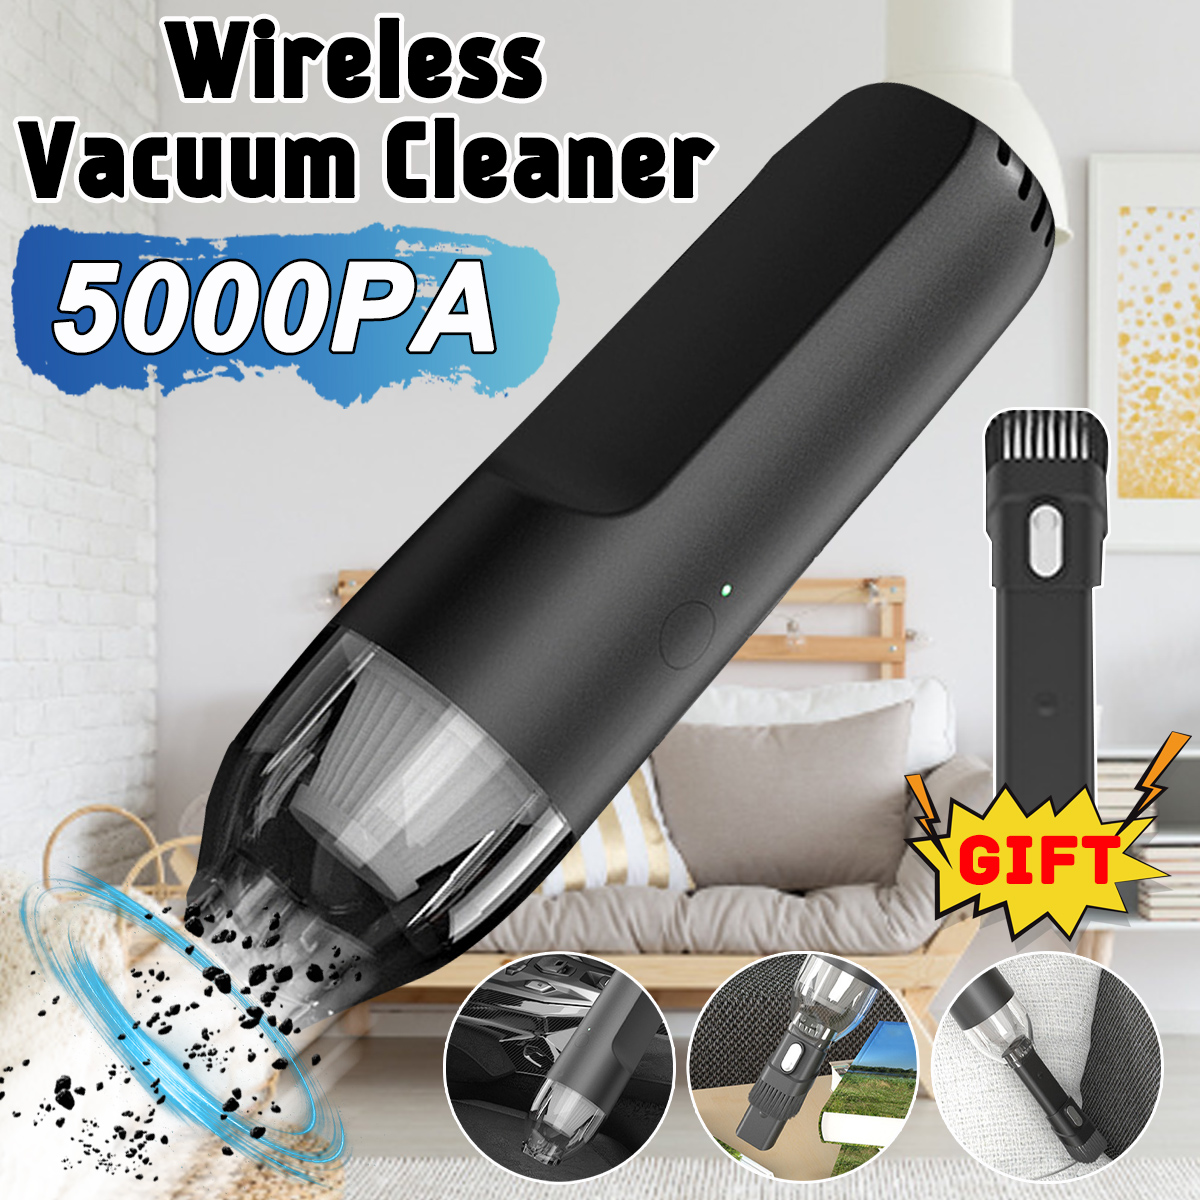 Find 2000mAh Handheld Car Power Cord/ USB Powered Car Office Wireless Vacuum Cleaner Keyboard Carpet Gap Dust Collector for Sale on Gipsybee.com with cryptocurrencies